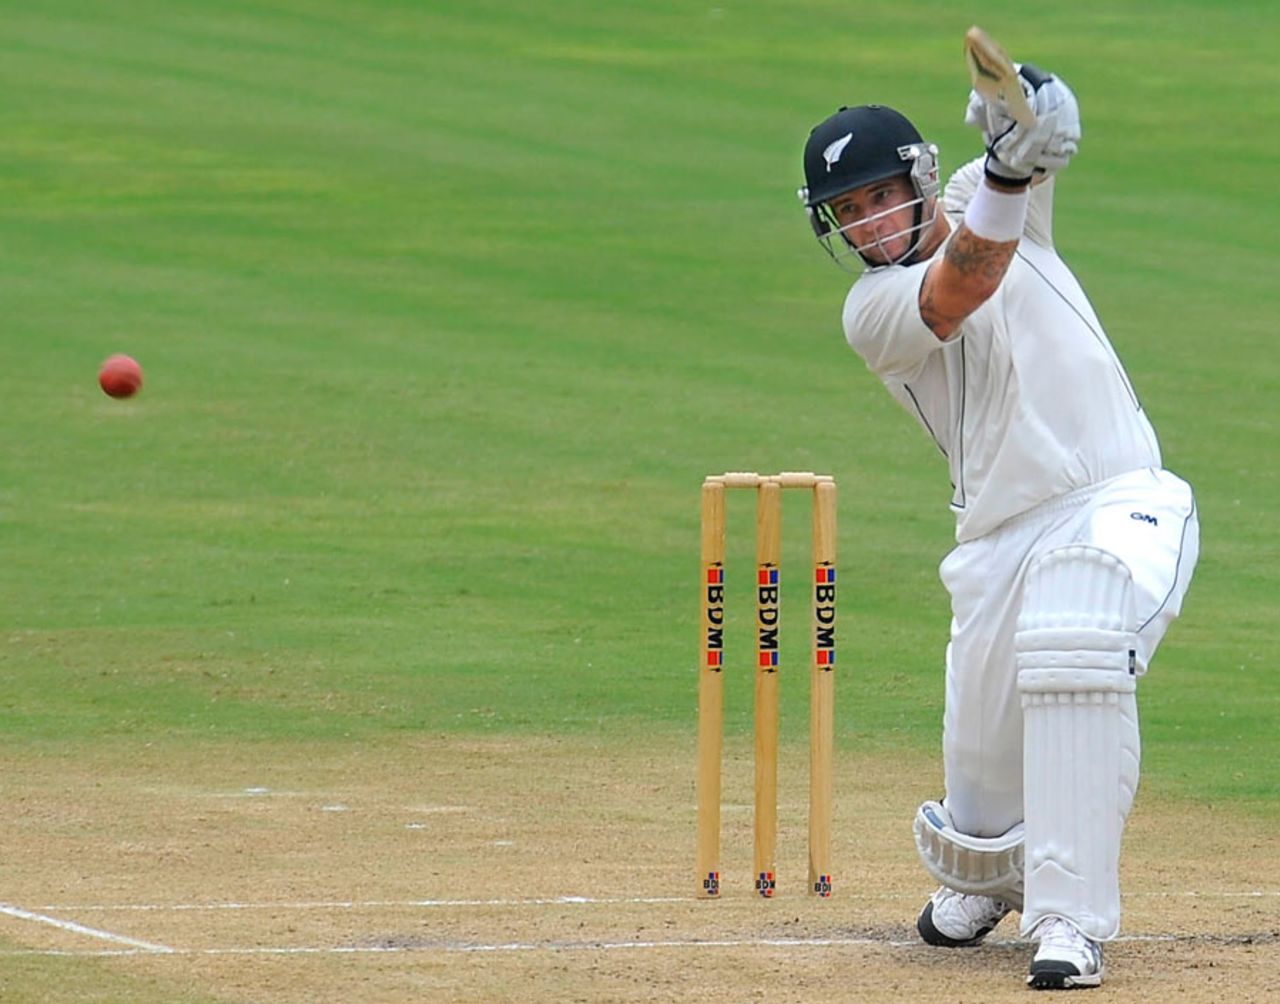 Doug Bracewell hammers through the off side, India A v New Zealand A, 2nd unofficial Test, Visakhapatnam, Sep 3, 2013